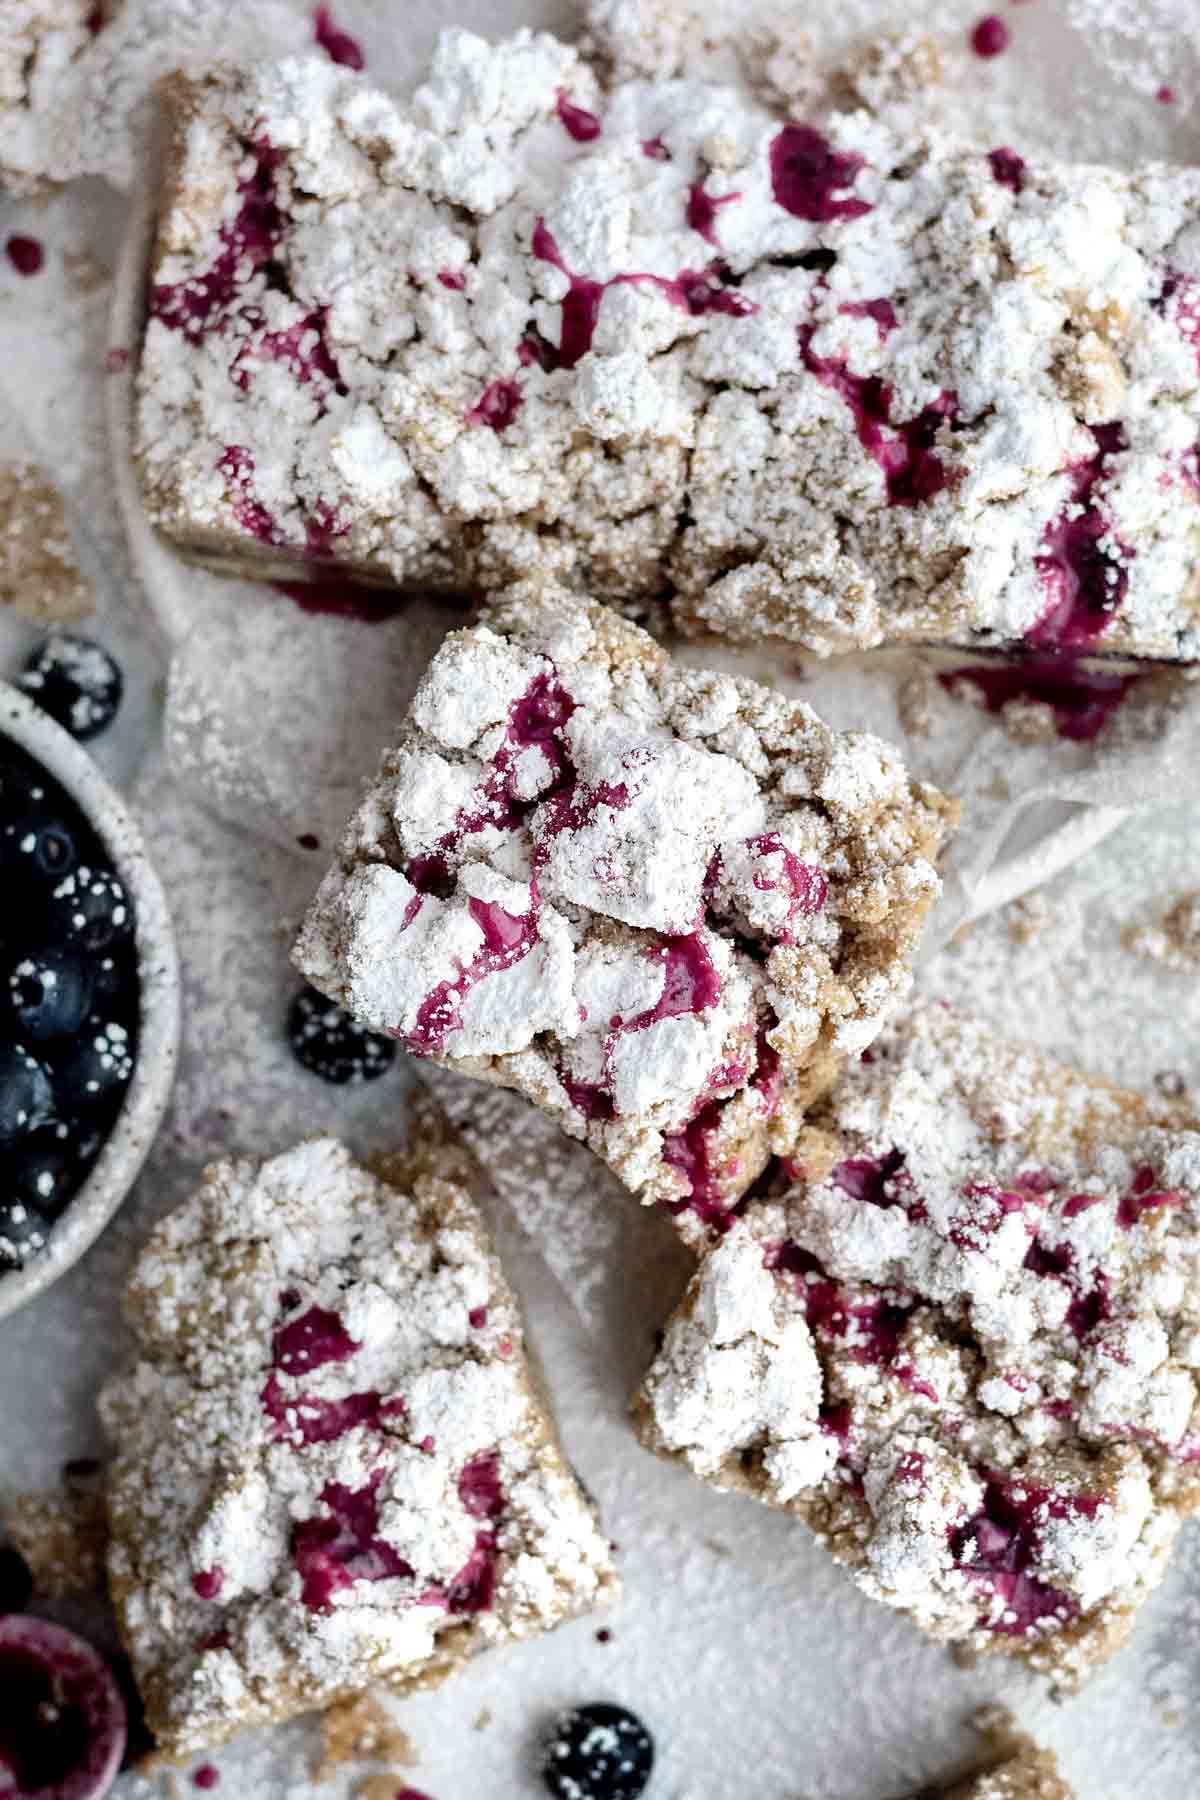 Blueberry glaze is drizzled sporadicly on squares of crumb cakes